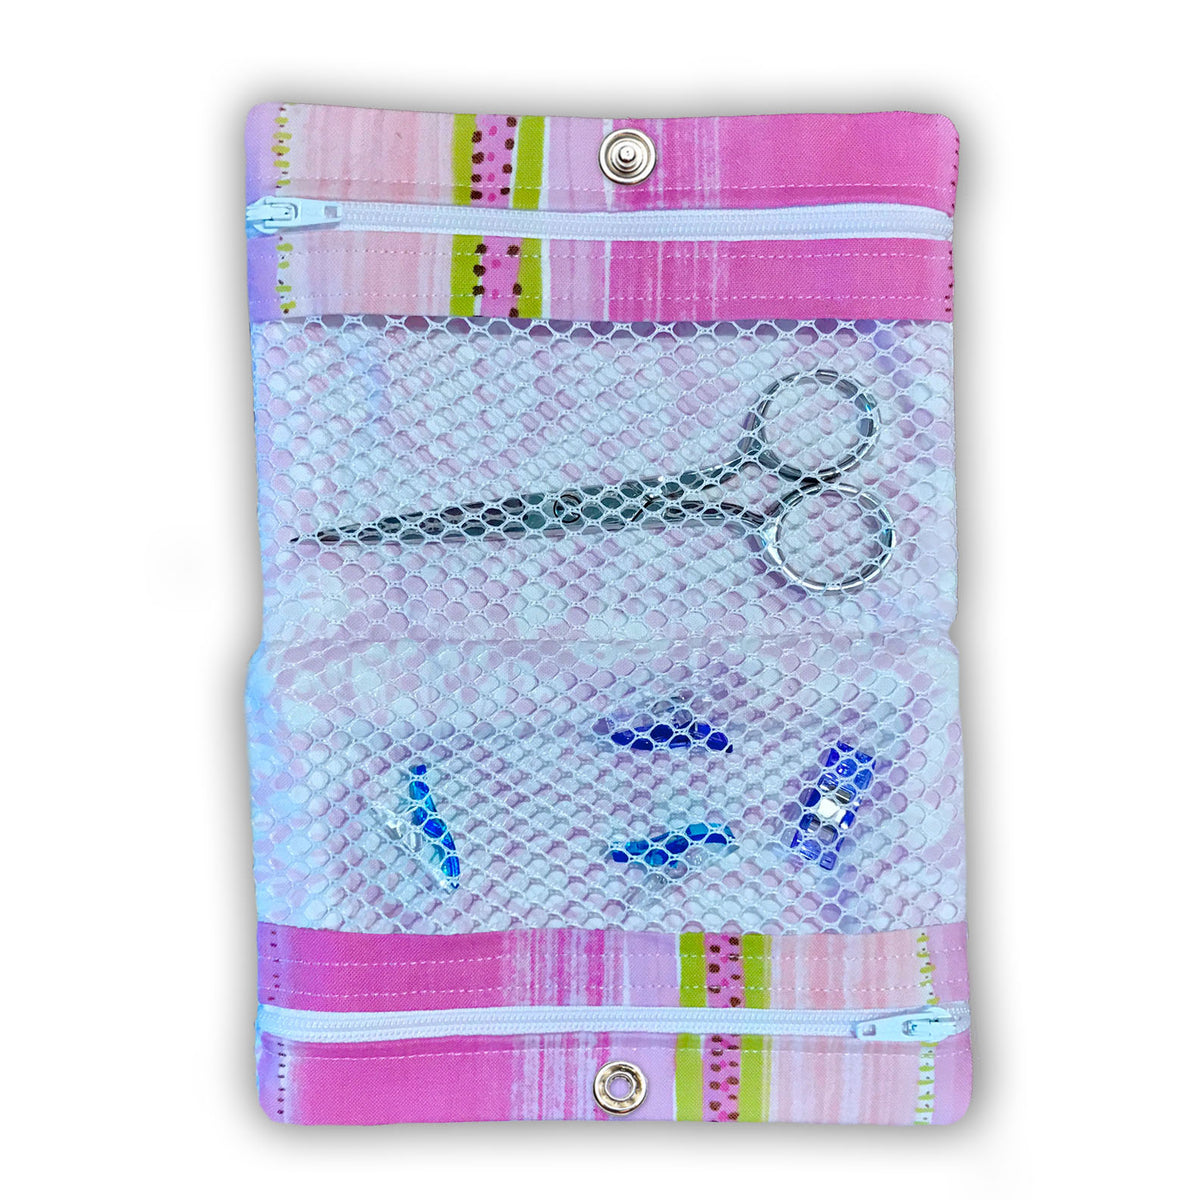 Twice as Nice Mesh Cases Embroidery Design CD